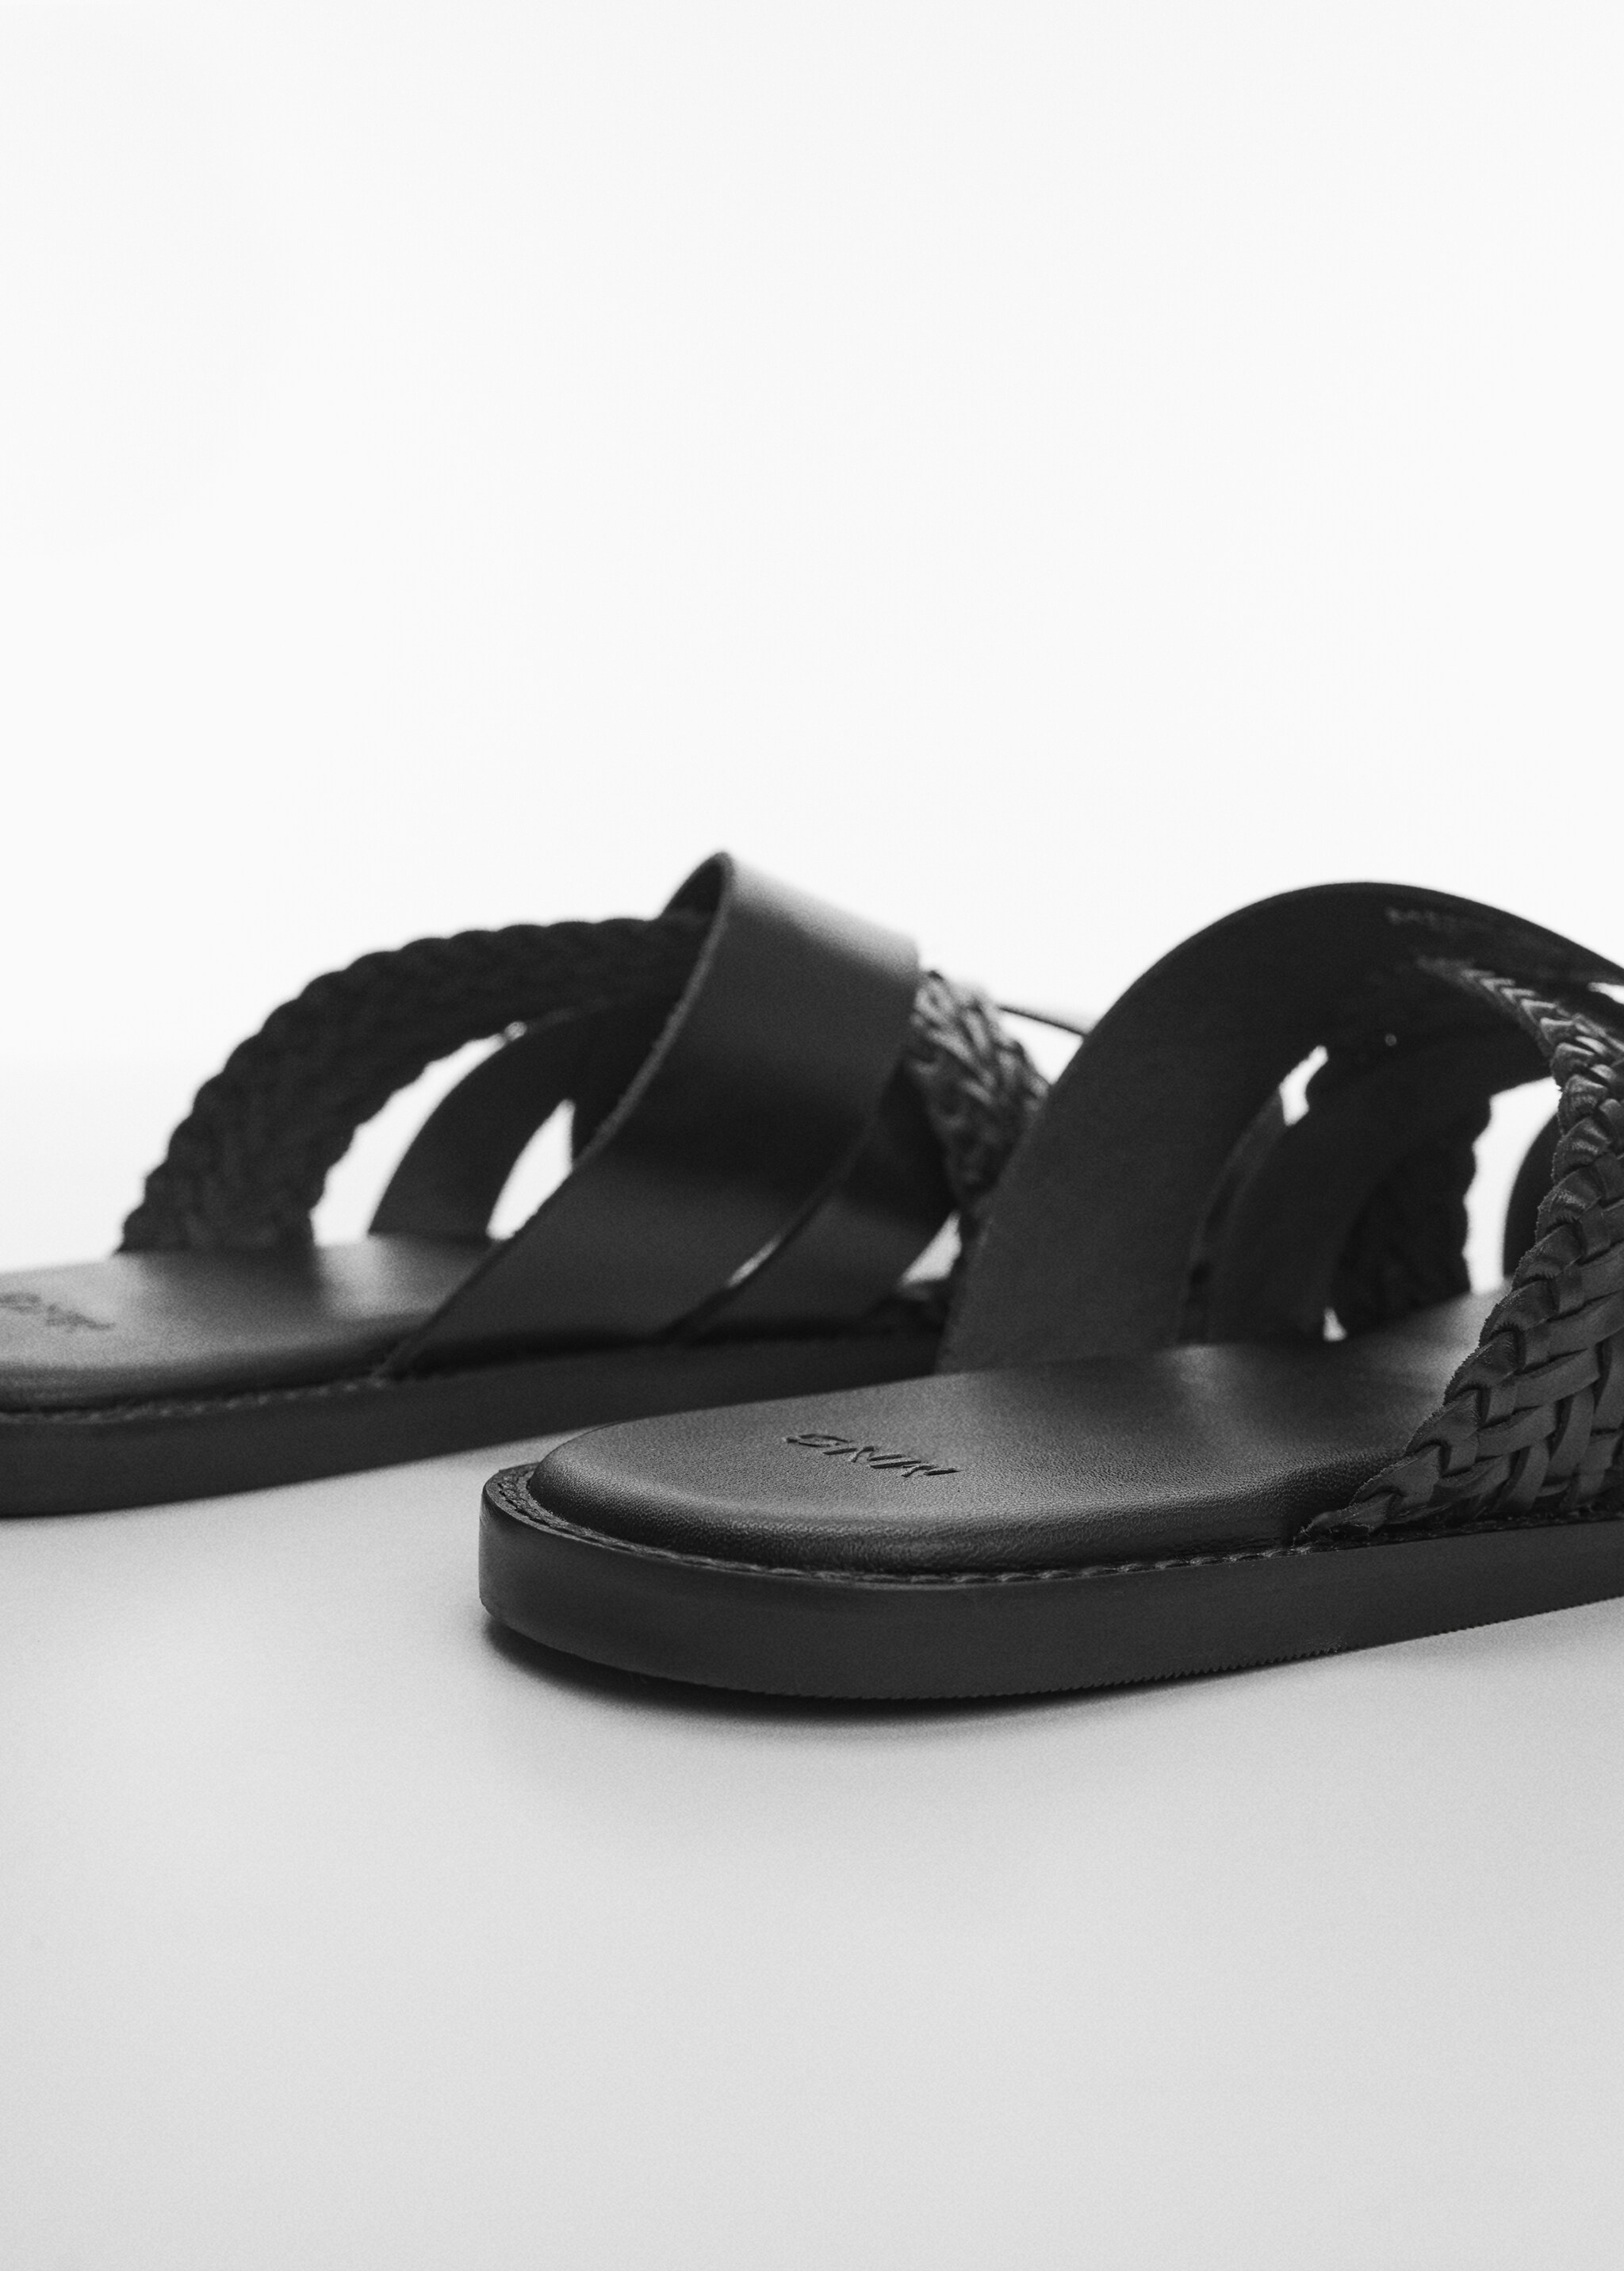 Braided leather sandals - Details of the article 1